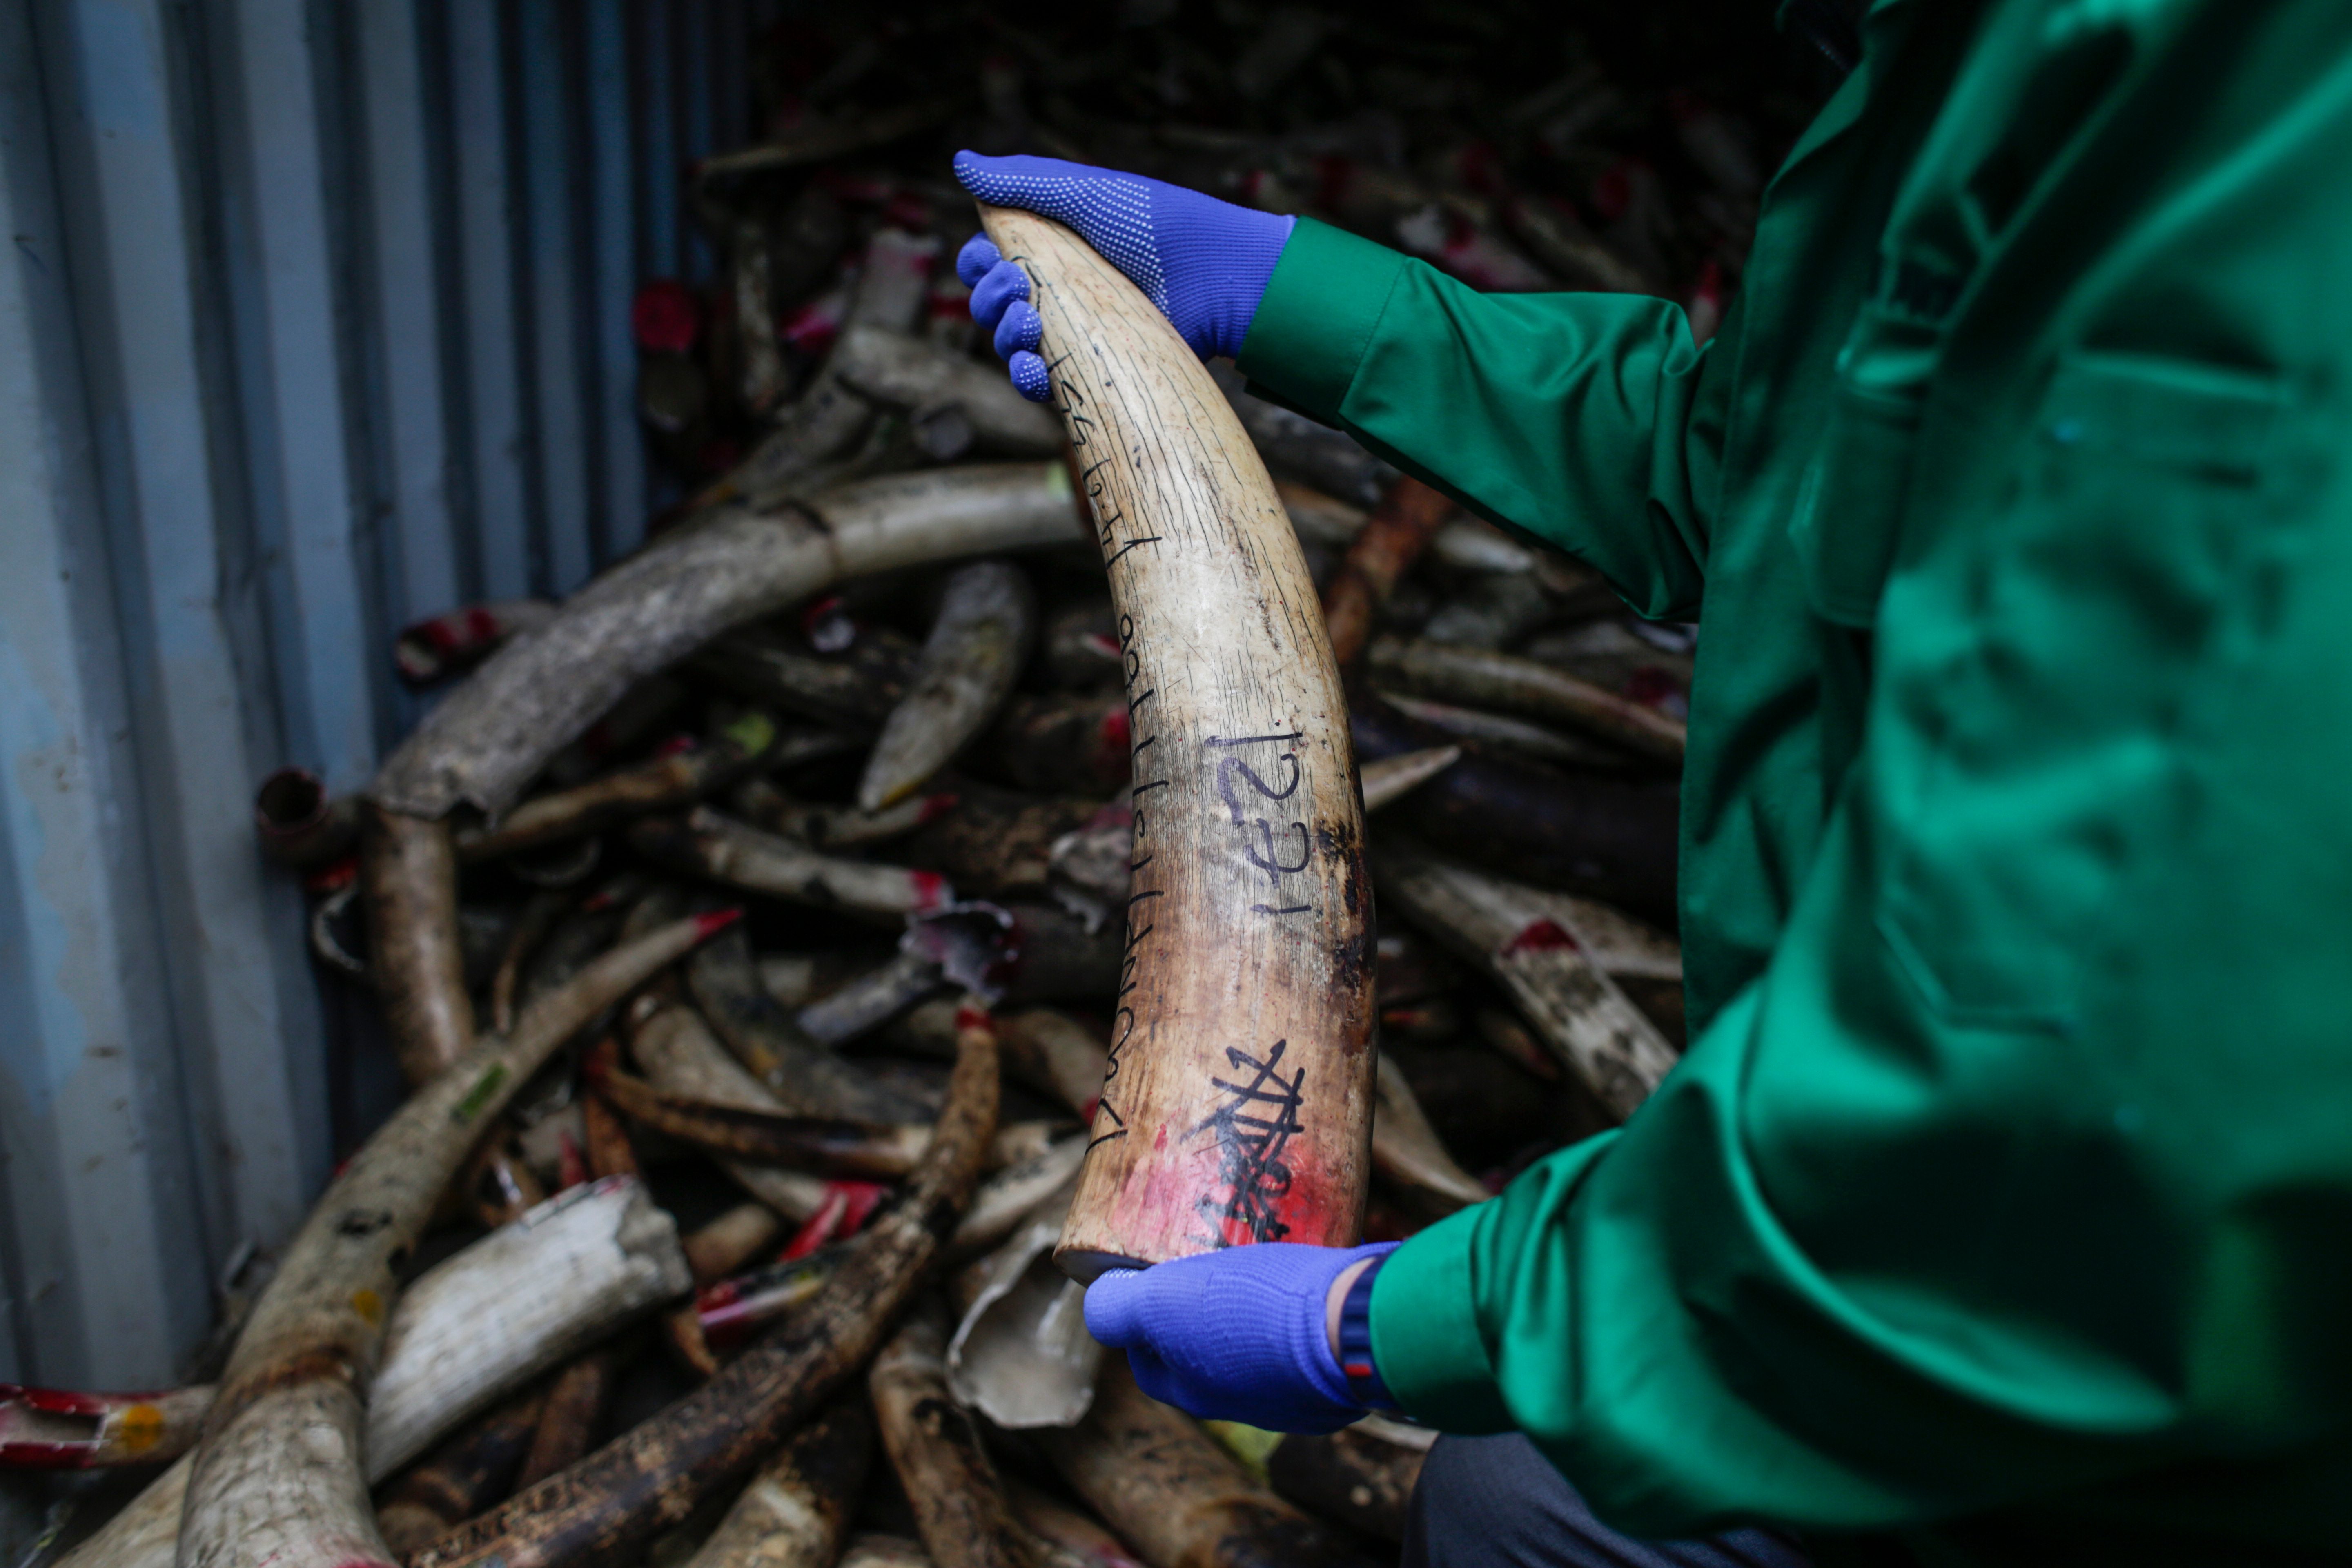 ILLEGAL TRADE. A Malaysian wildlife official holds a confiscated elephant ivory tusk from Africa before destroying the ivory, in Port Dickson, Negeri Sembilan, Malaysia, April 14, 2016. File photo by Fazry Ismail/EPA 